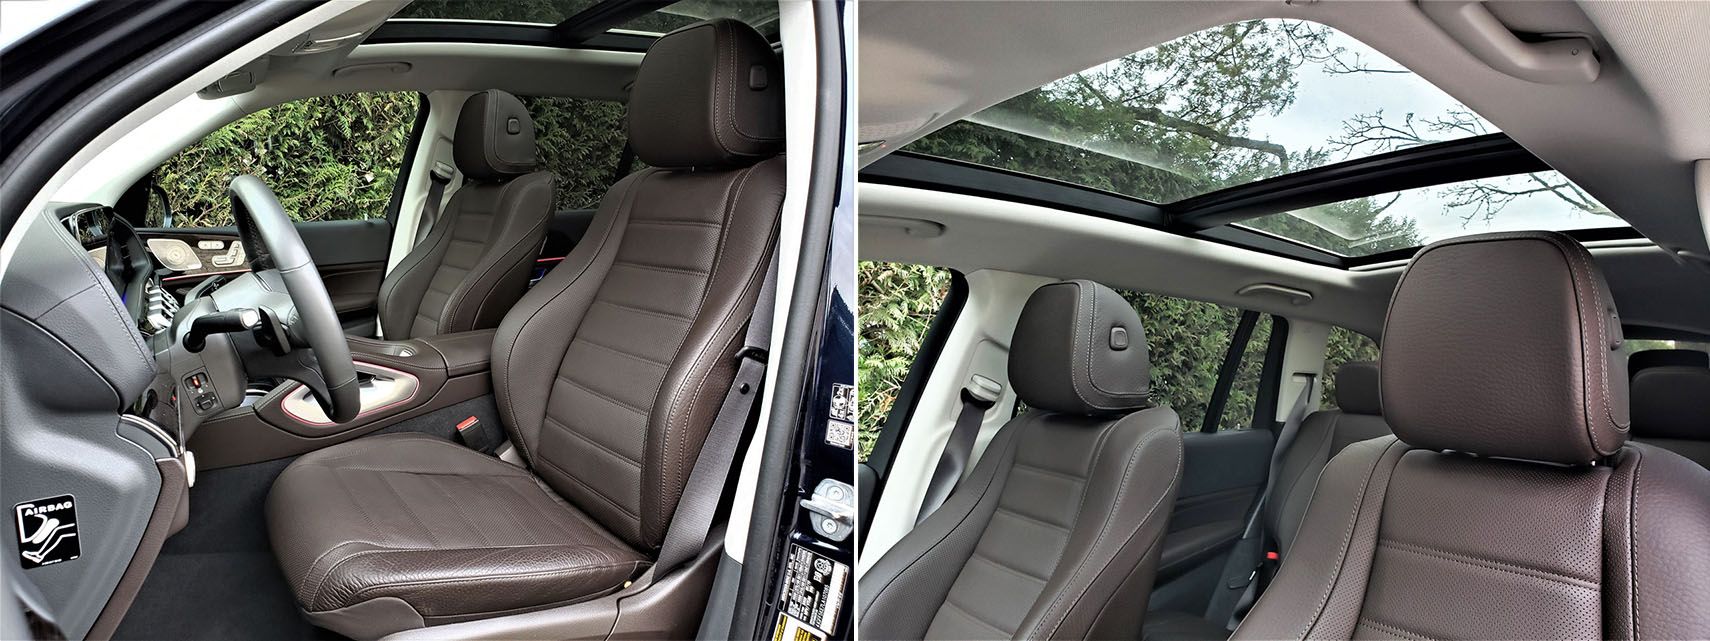 The seats are wonderfully comfortable and panoramic sunroofs are always a positive.